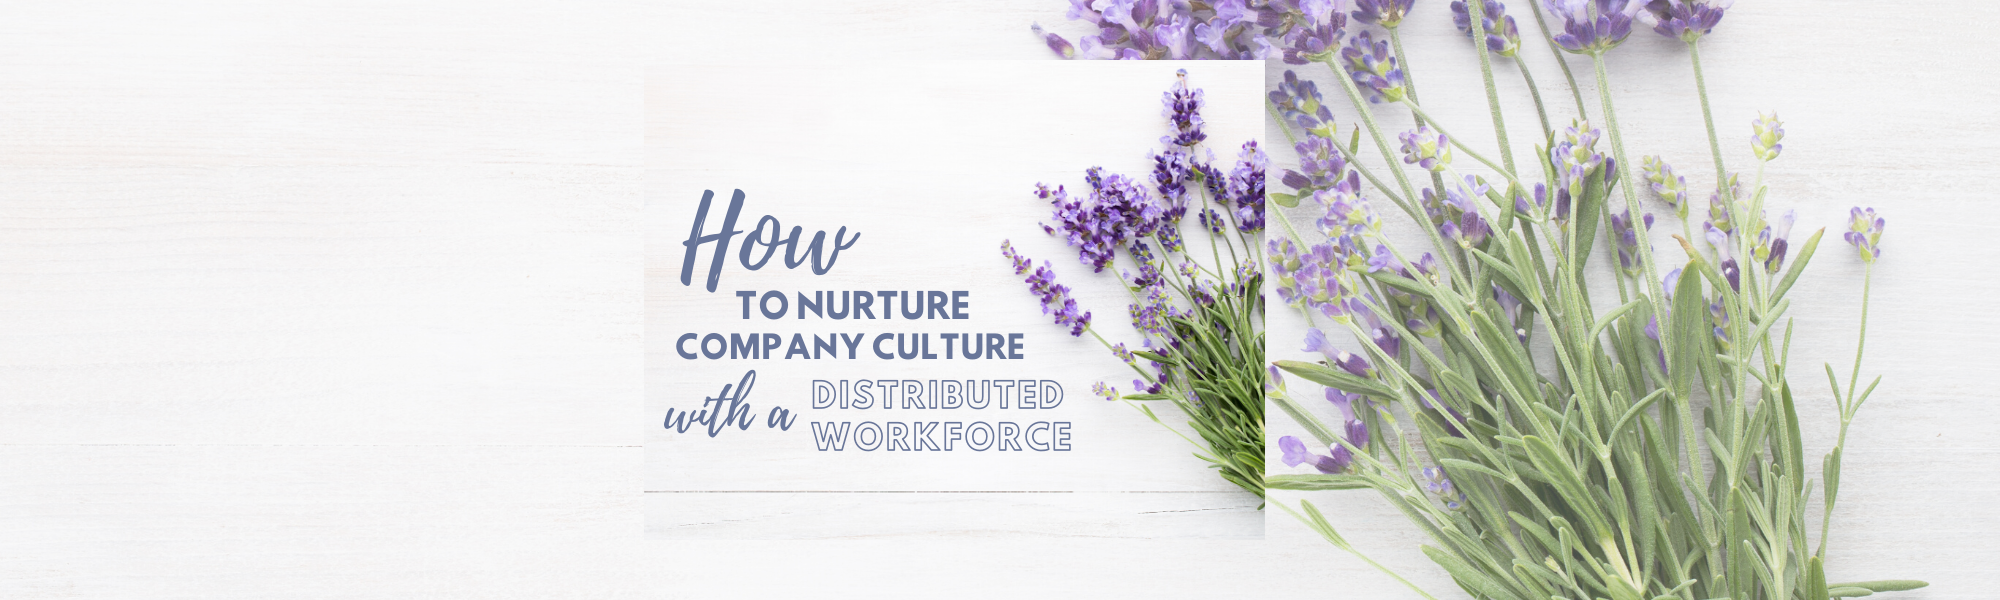 How to Nurture Company Culture with a Distributed Workforce